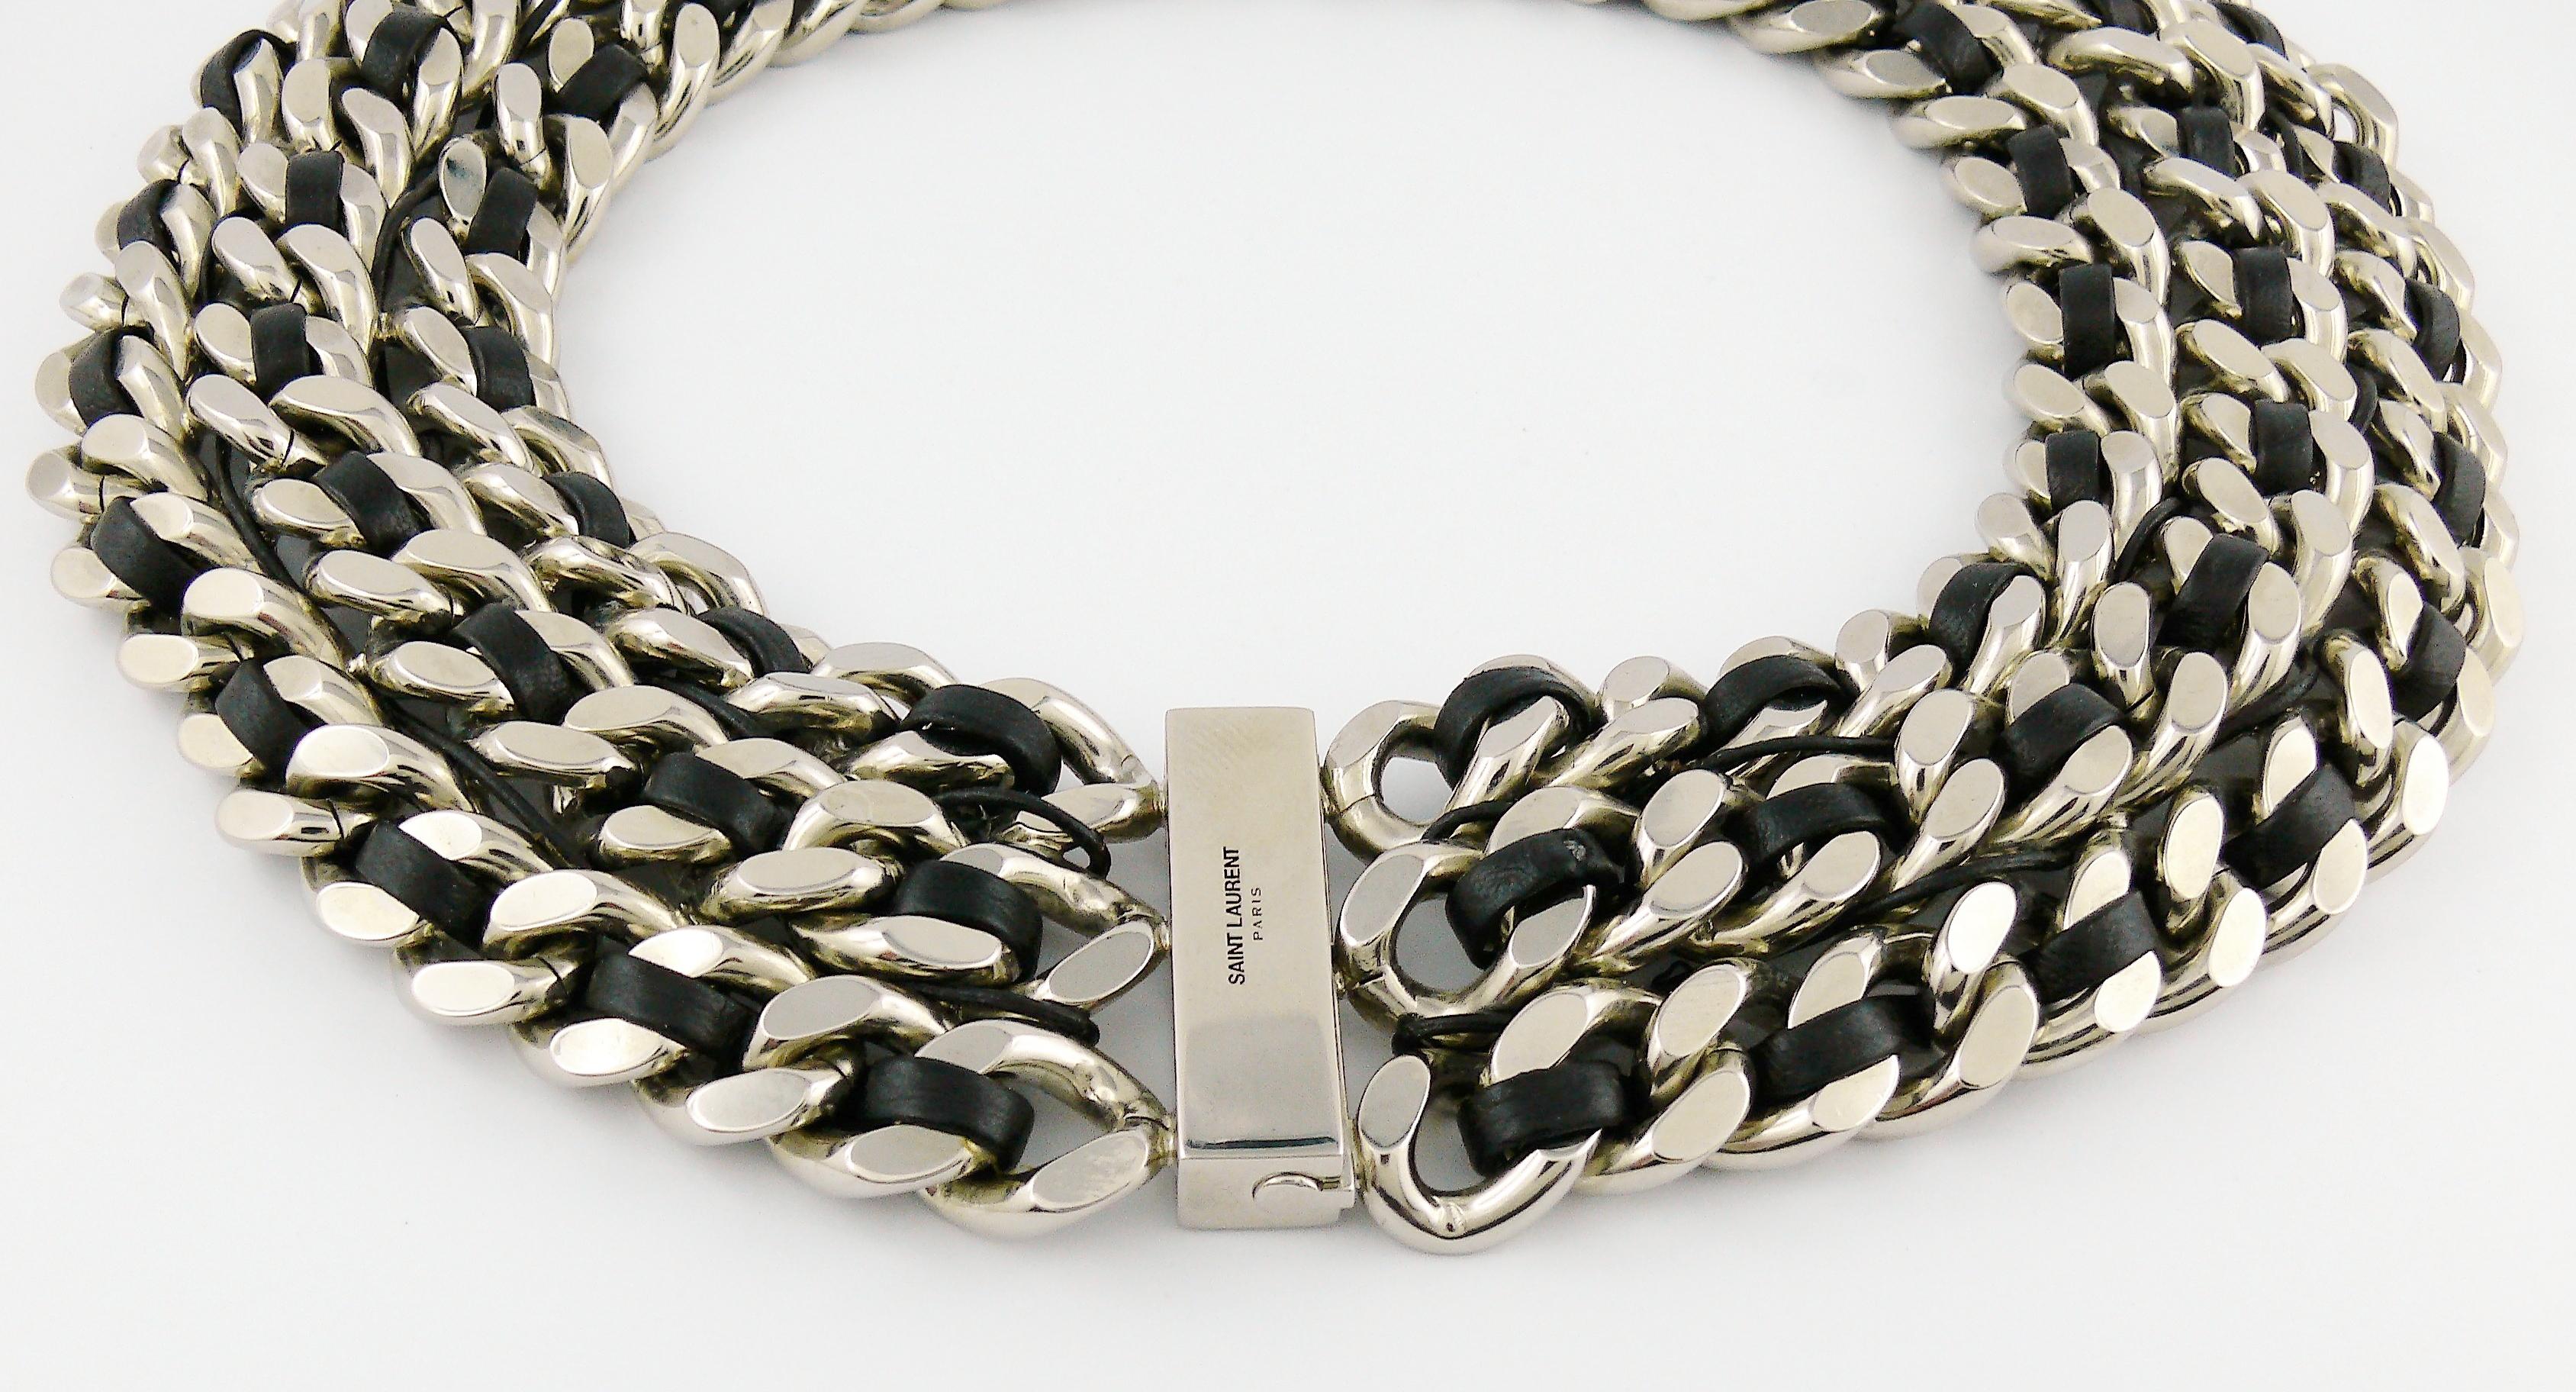 Saint Laurent Woven Leather Chunky Curb Chain Choker Necklace For Sale 1